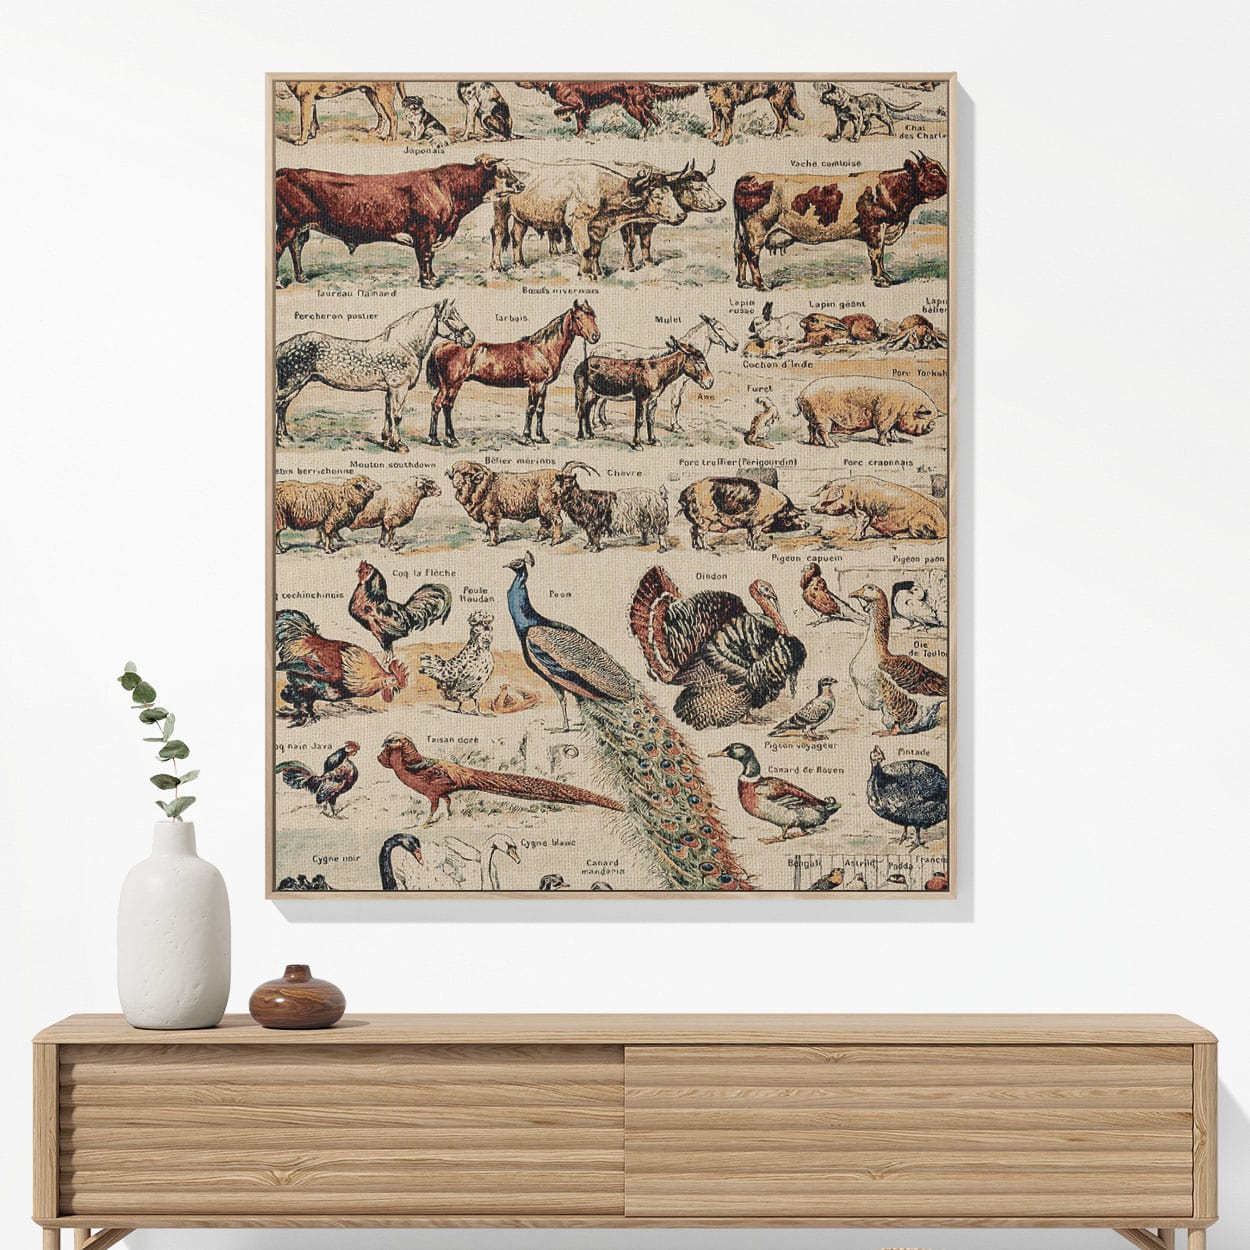 Farm Animals Woven Blanket Woven Blanket Hanging on a Wall as Framed Wall Art